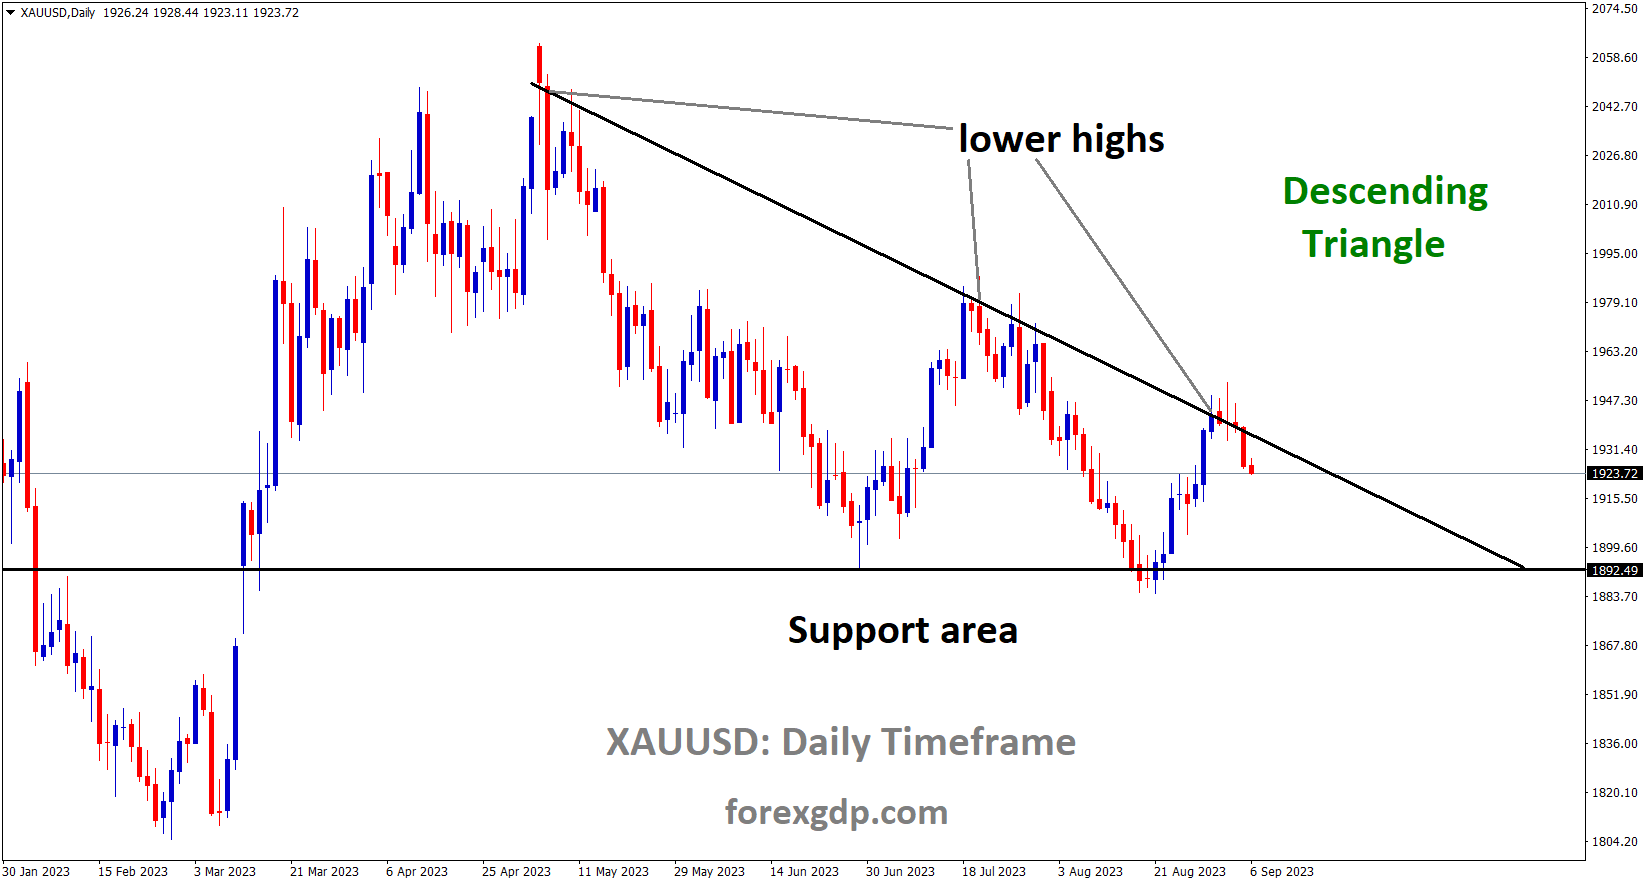 XAUUSD Gold price is moving in the Descending triangle pattern and the market has fallen from the lower high area of the pattern